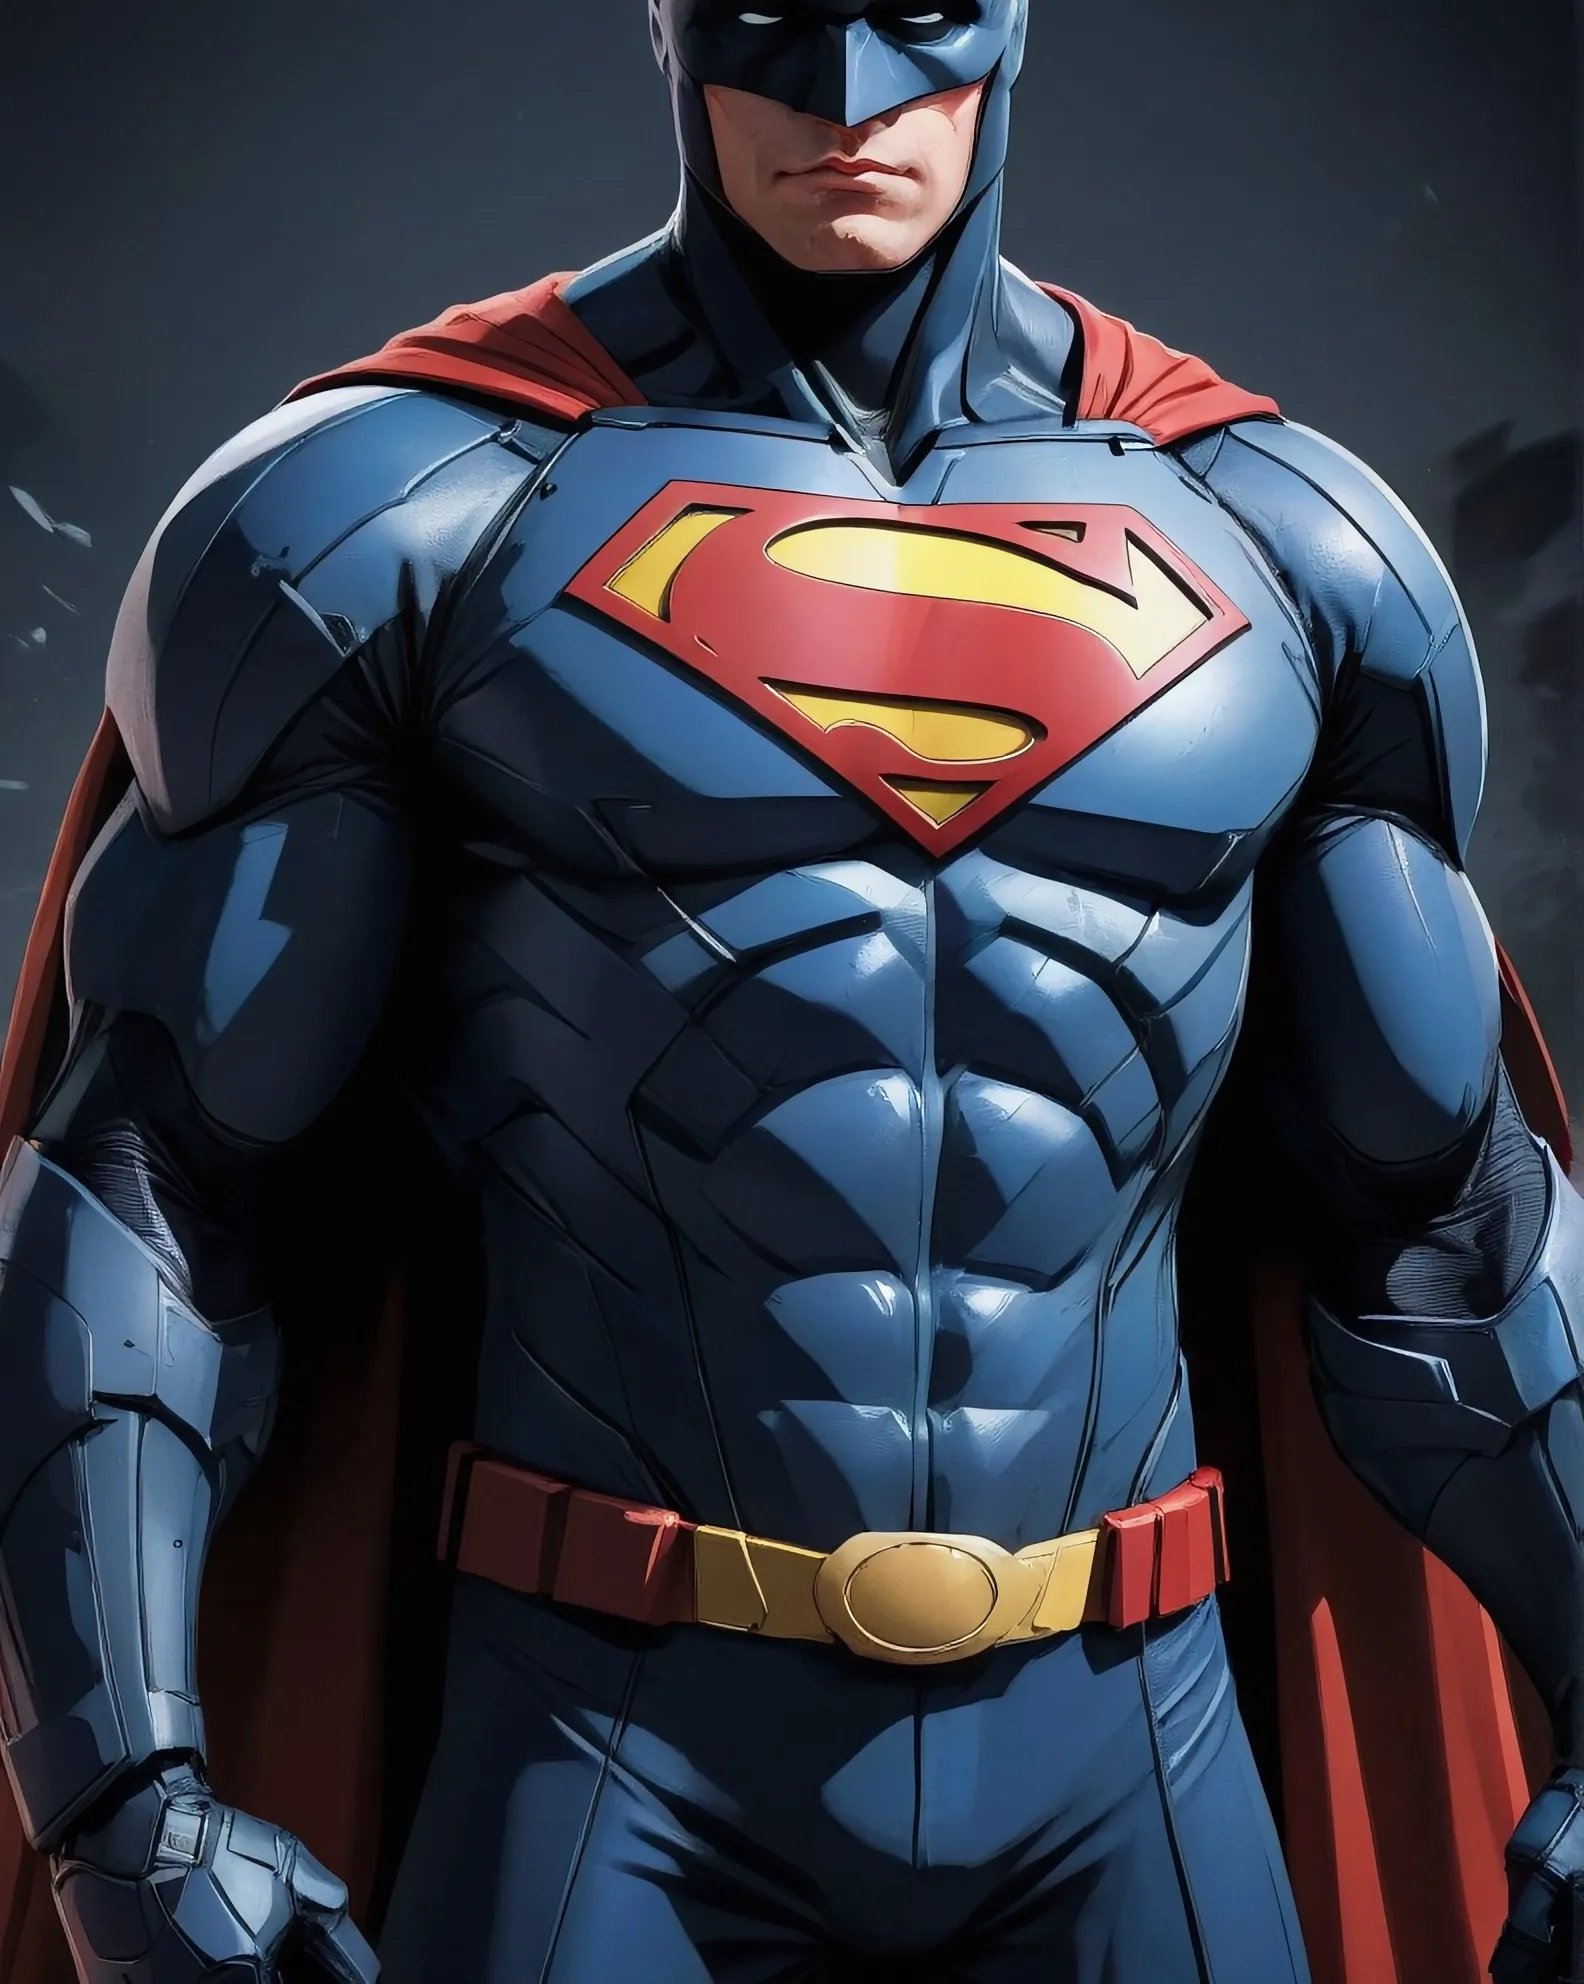 Batman costume with Superman logo on the chest 